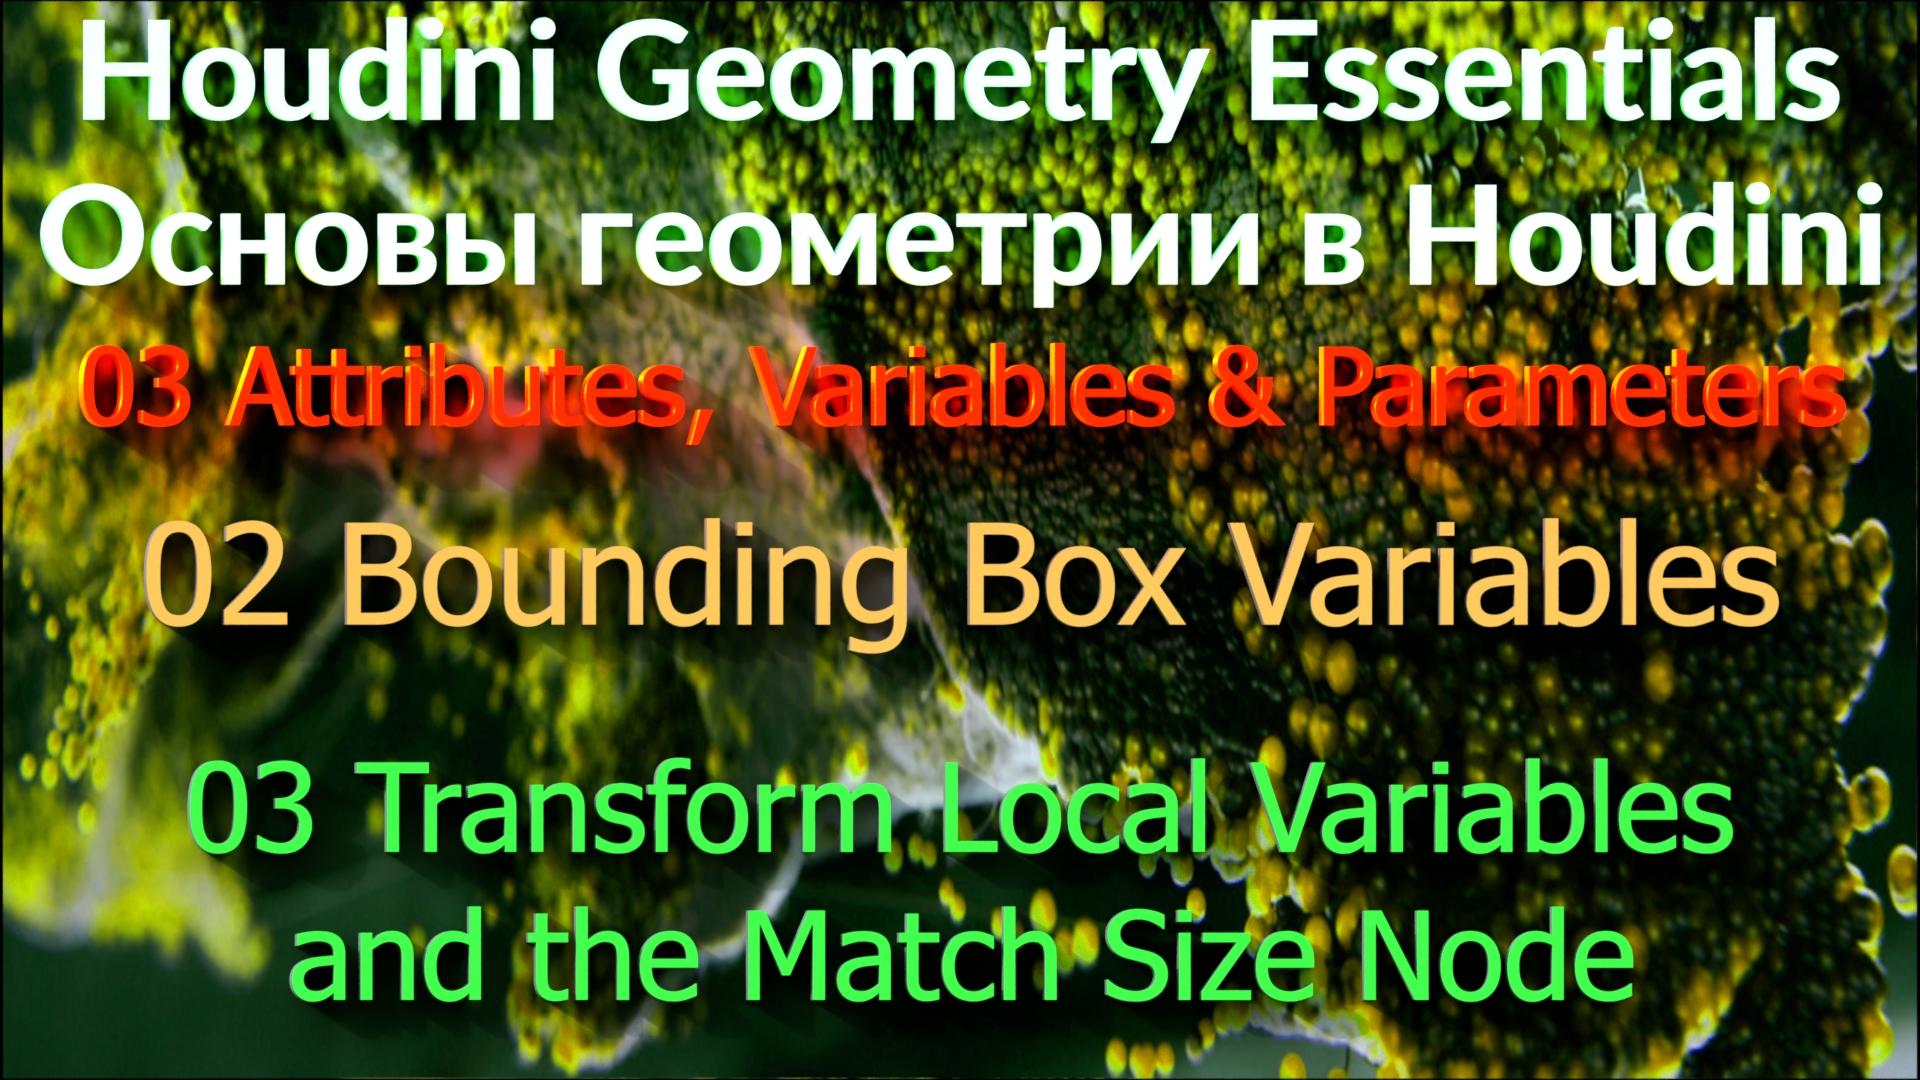 03_02_03 Transform Local Variables and the Match Size Node